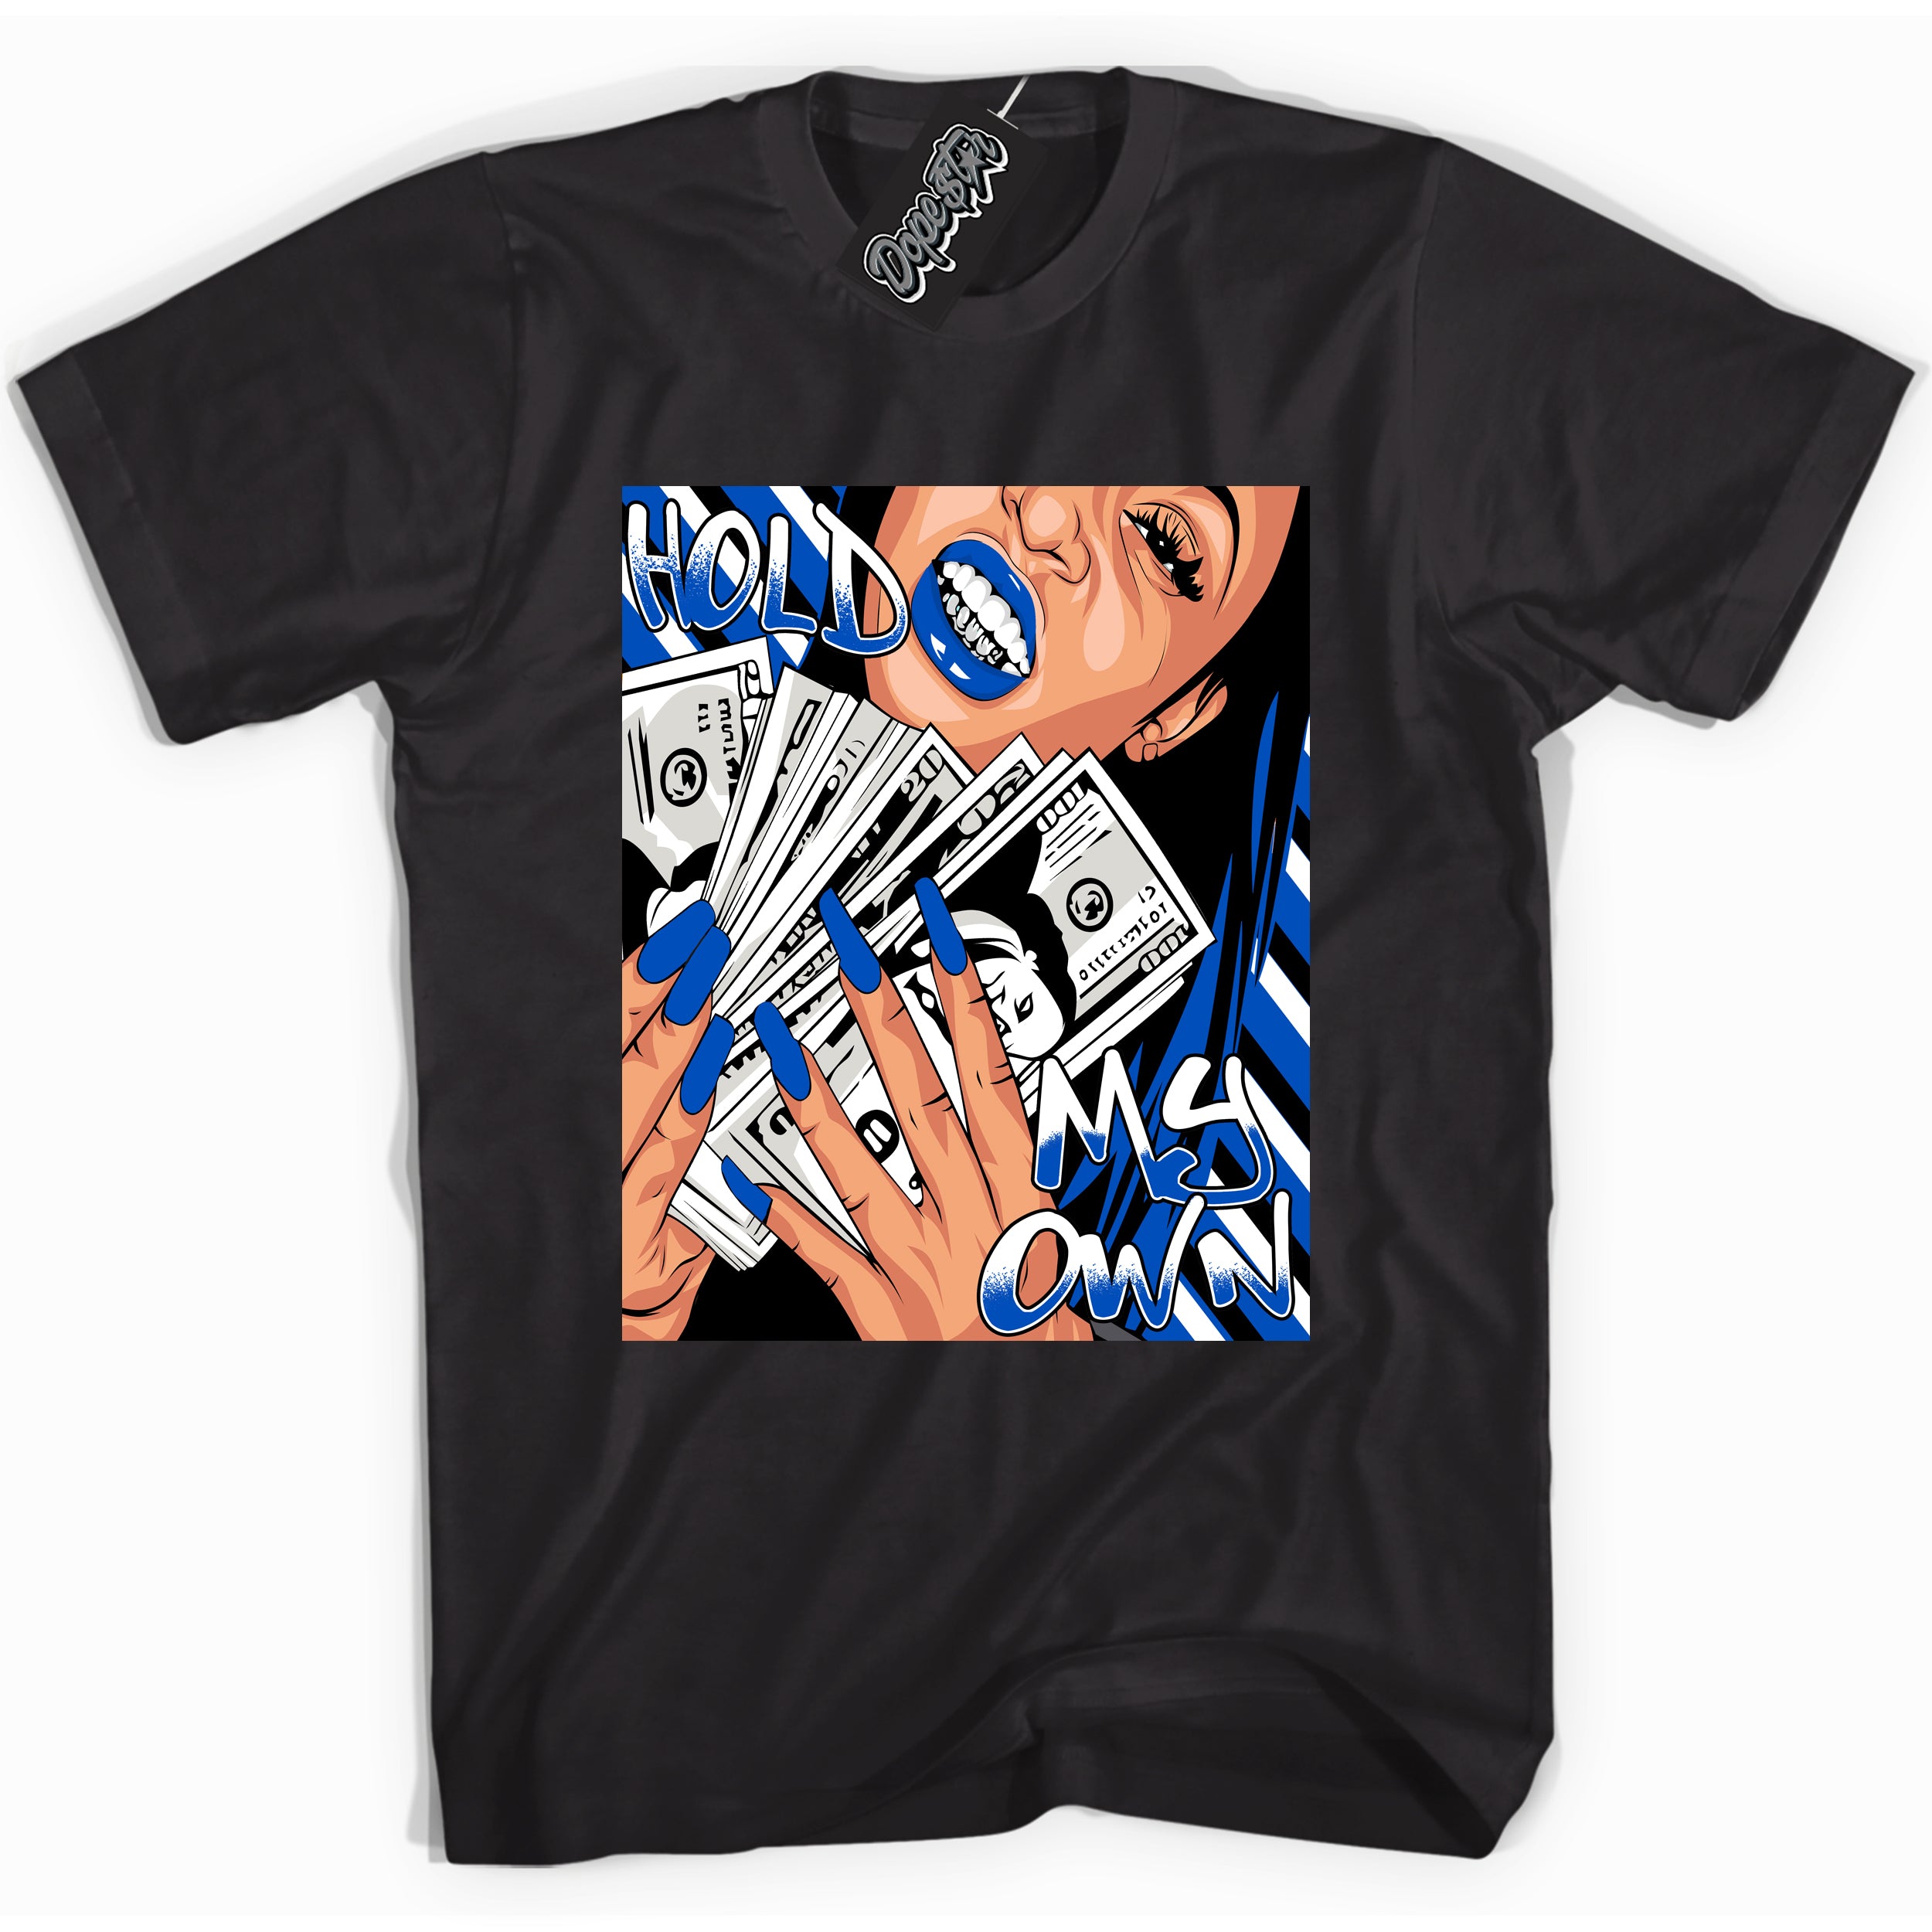 Cool Black graphic tee with "Hold My Own" design, that perfectly matches Royal Reimagined 1s sneakers 